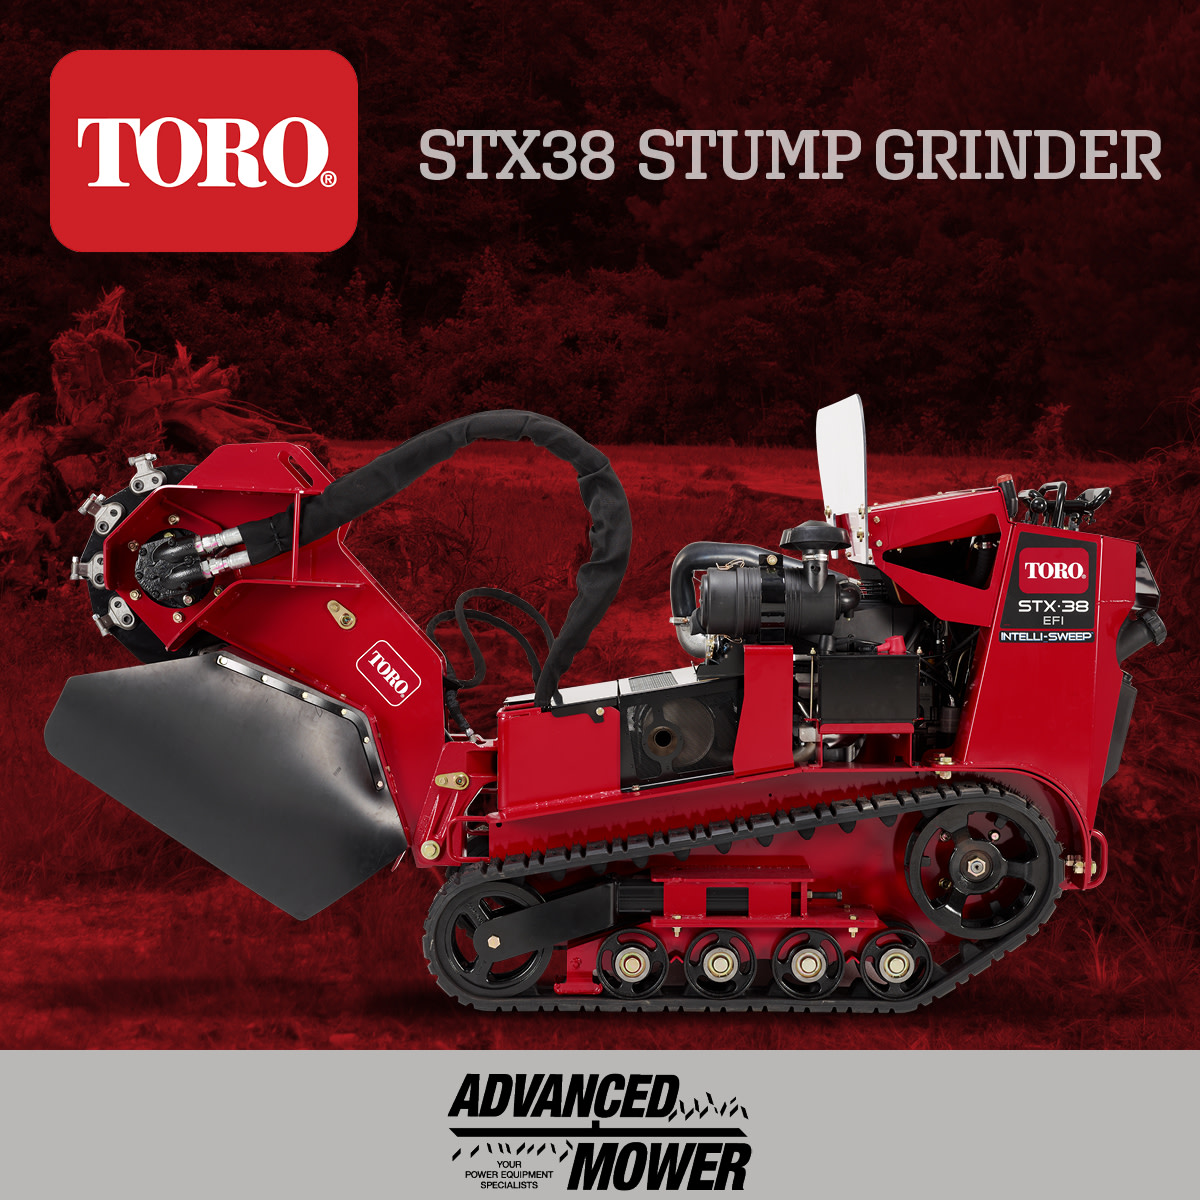 Faster. Easier. Advanced. Innovative. Just a few words describing @TheToroCompany's STX-38 #StumpGrinder.

Chip away at your tasks. Start by visiting #AdvancedMower in #BessemerAL. More product info: bit.ly/3C4WM6I